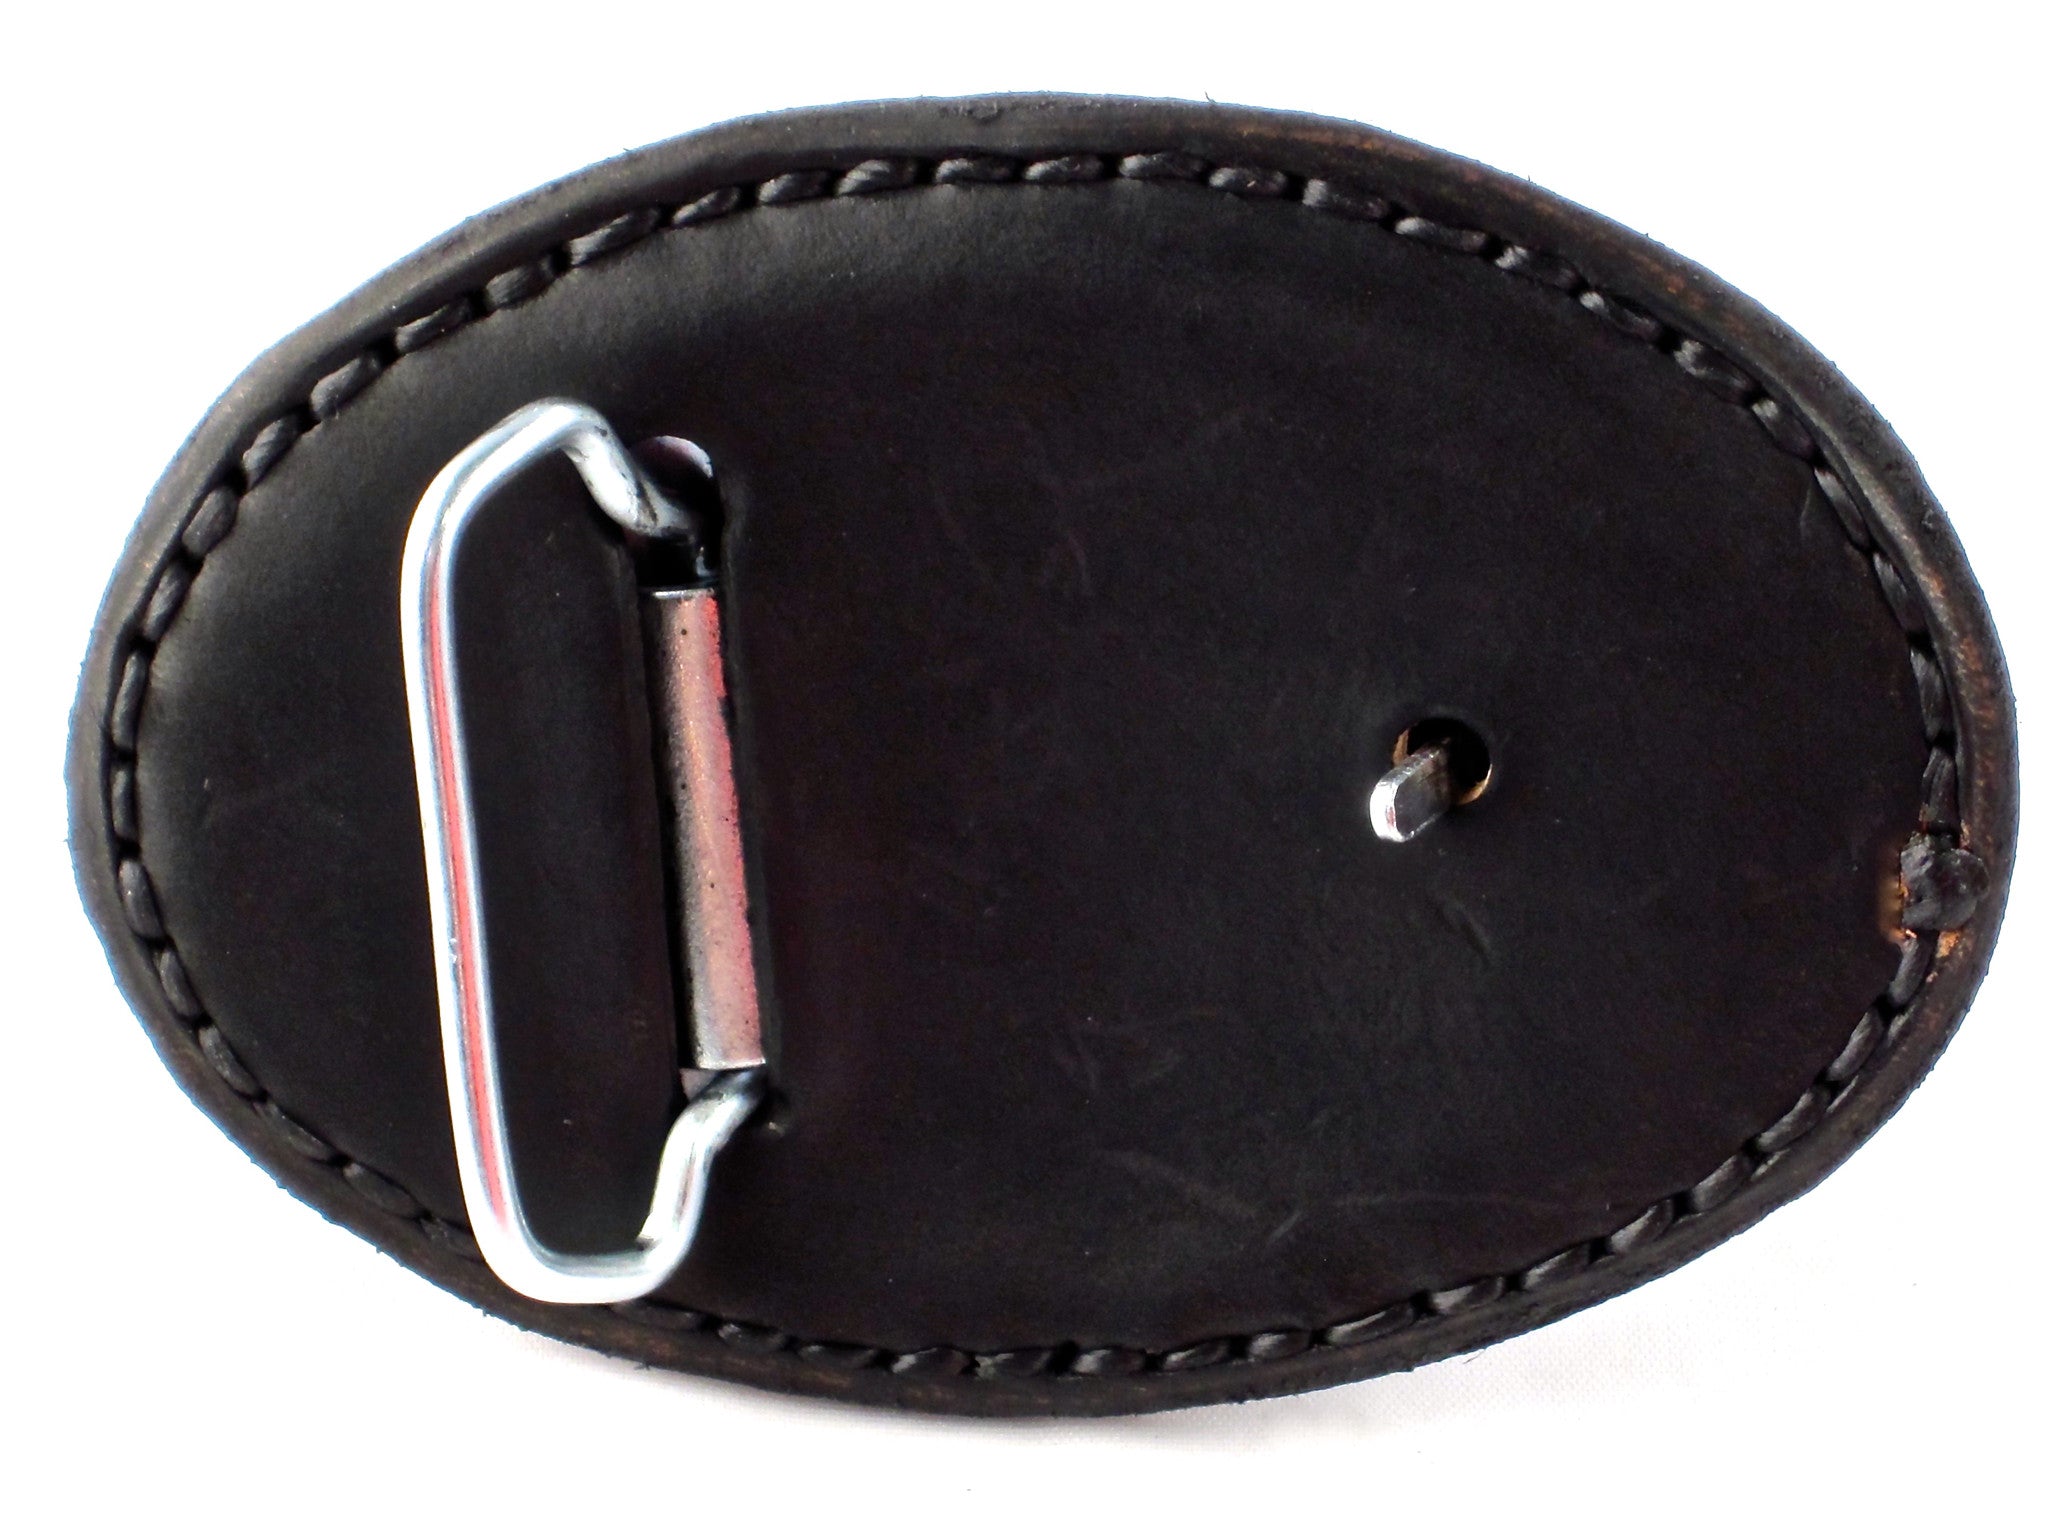 HAND-STITCHED LEATHER BUCKLE ADORNED WITH A STAPLE PLATE  by NYET Jewelry.